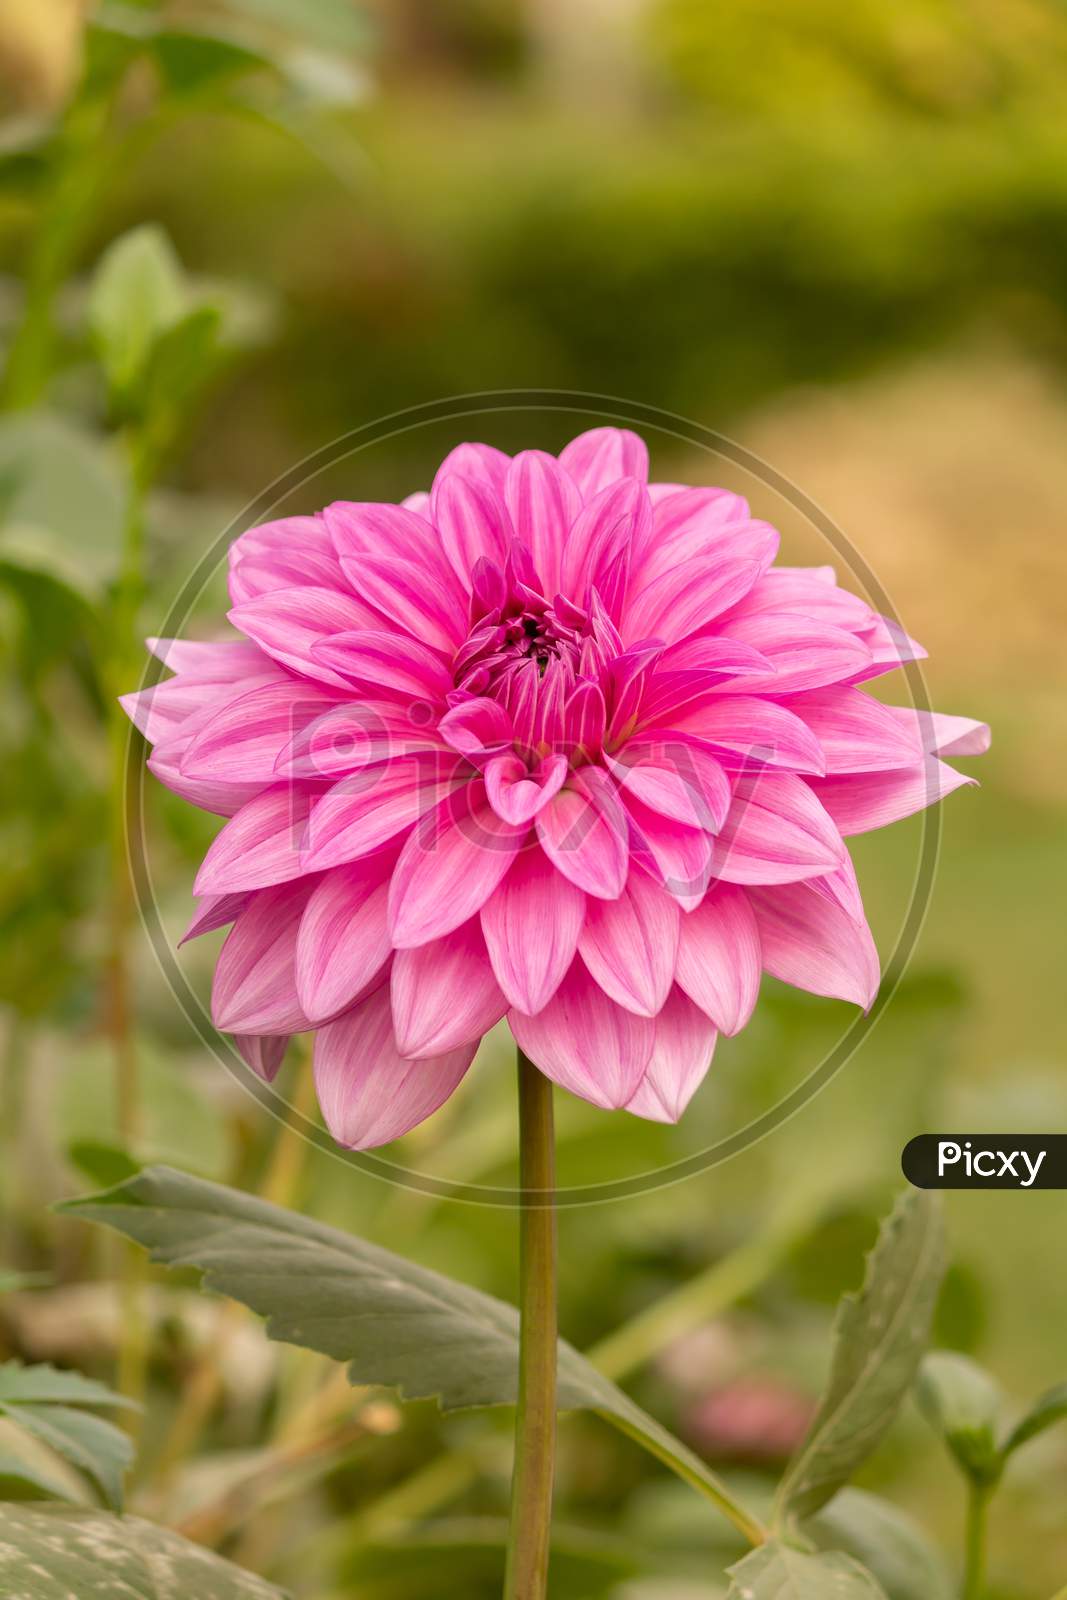 View Of Pink Daisy Flower In The Garden On A Stem In Cloudy Day Facing Front In Vertical Frame